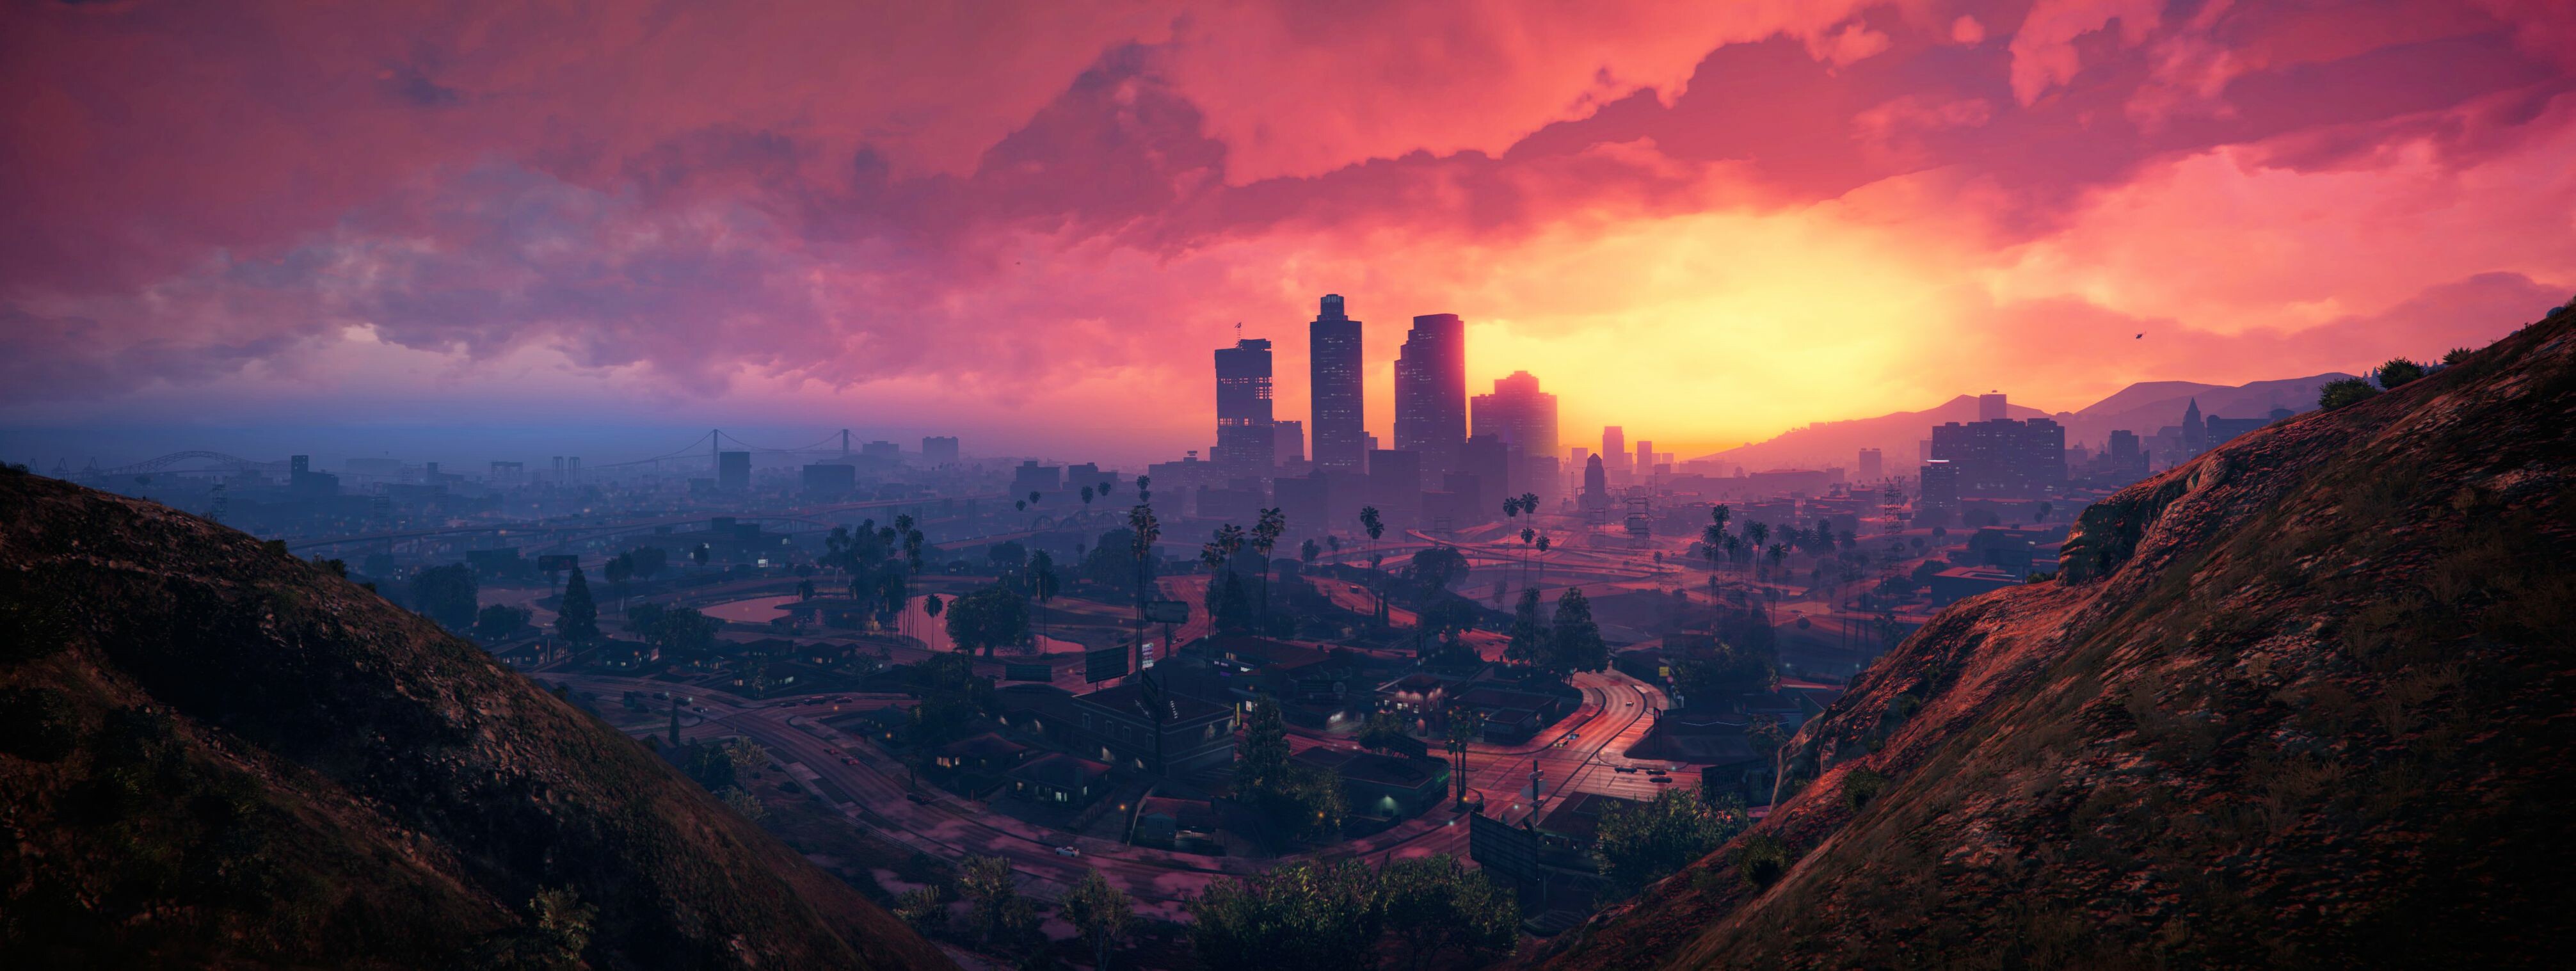 28+ 4K GTA 5 Wallpapers: HD, 4K, 5K for PC and Mobile | Download free  images for iPhone, Android